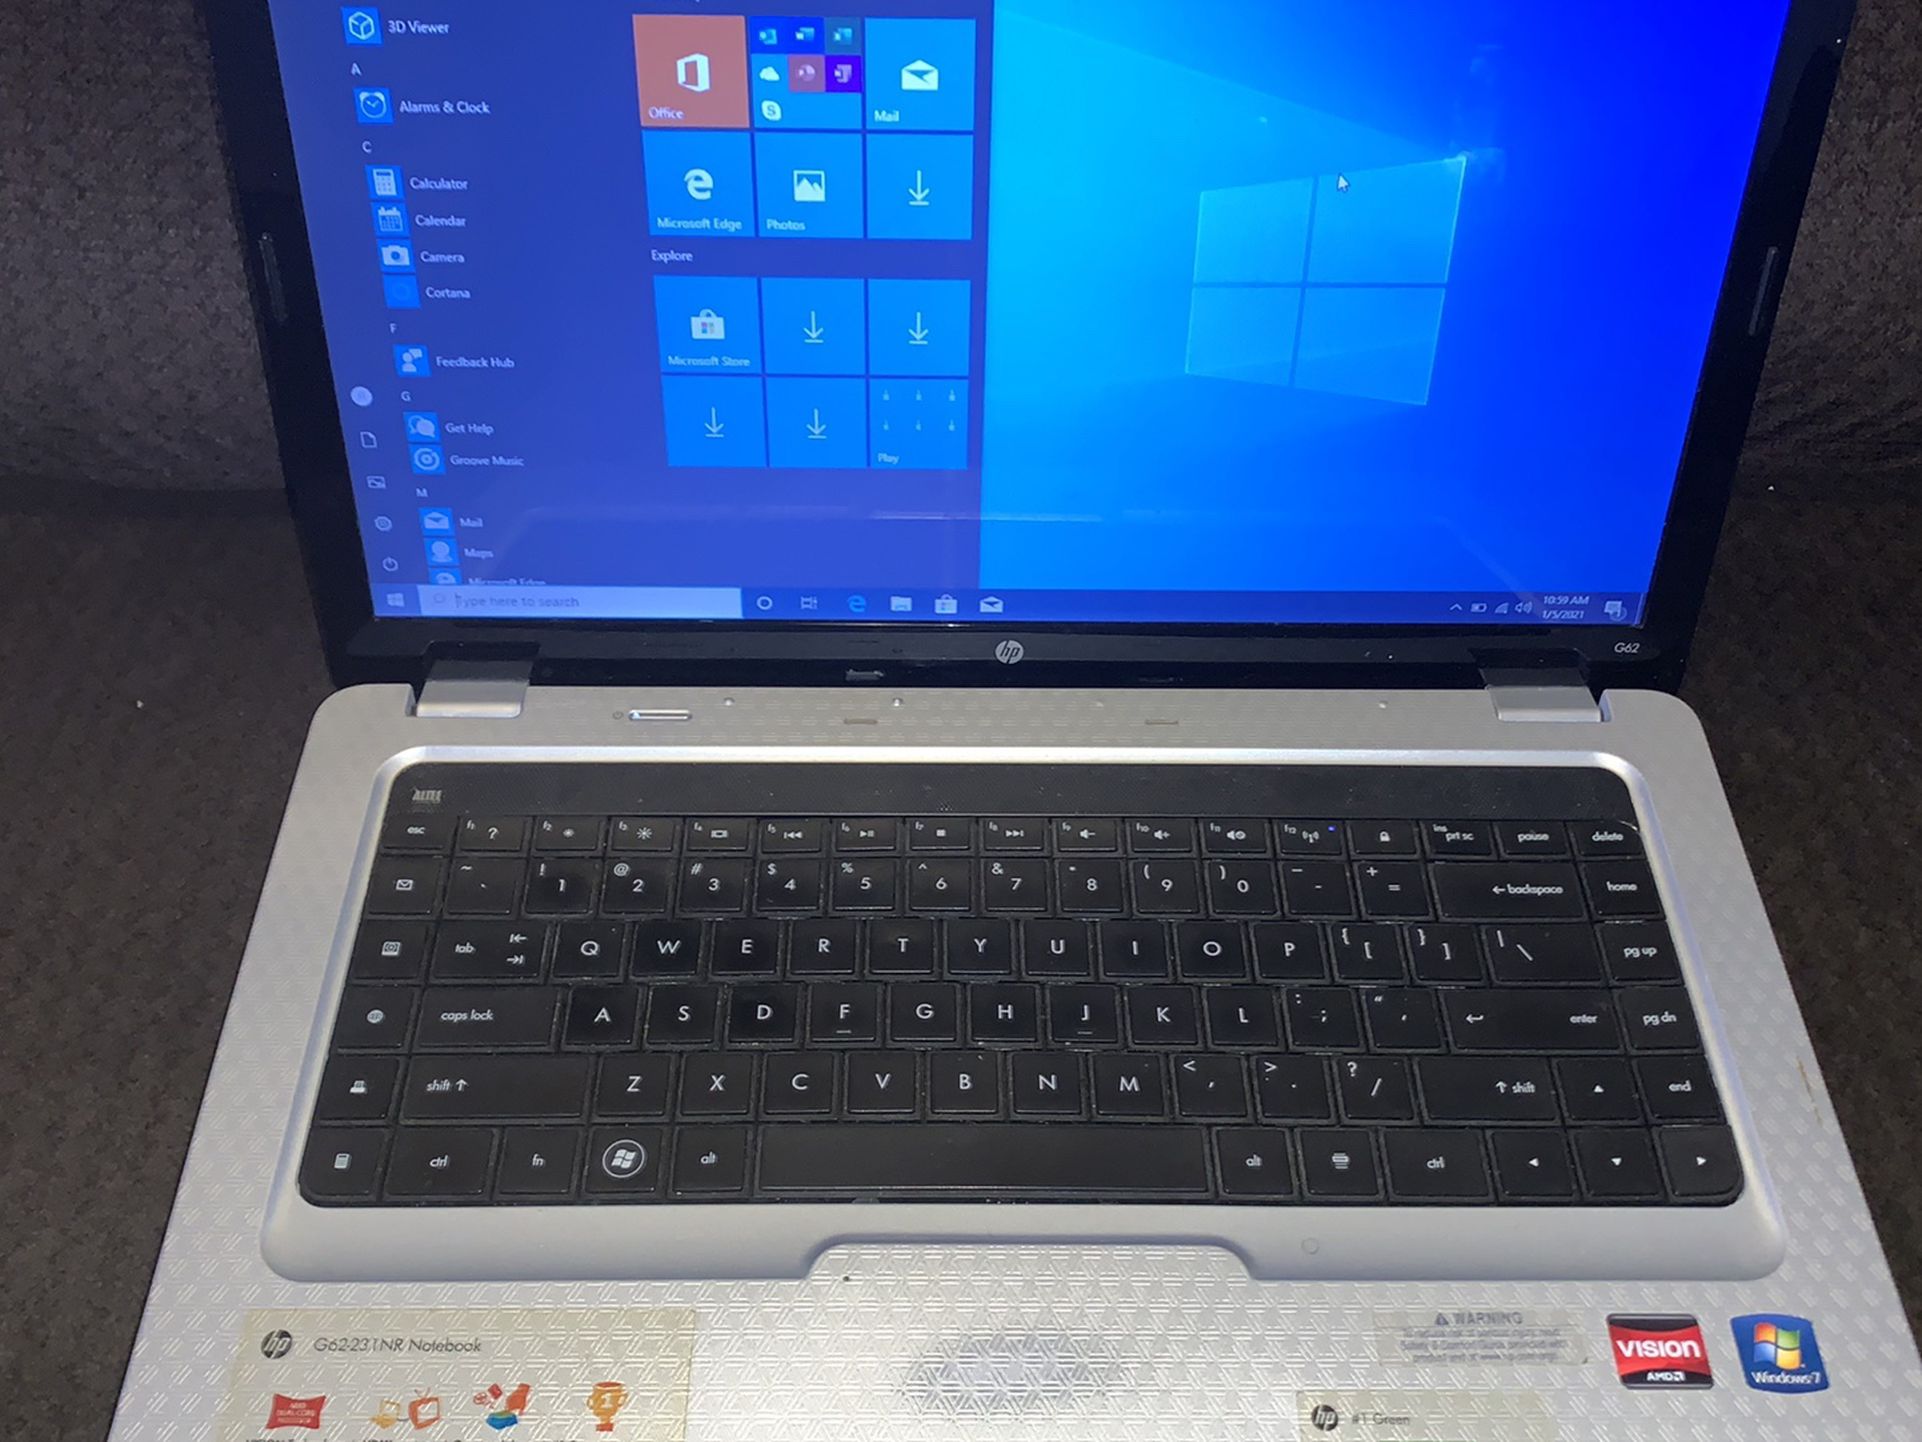 HP G62 LAPTOP WINDOWS 10 MICROSOFT OFFICE AND MORE